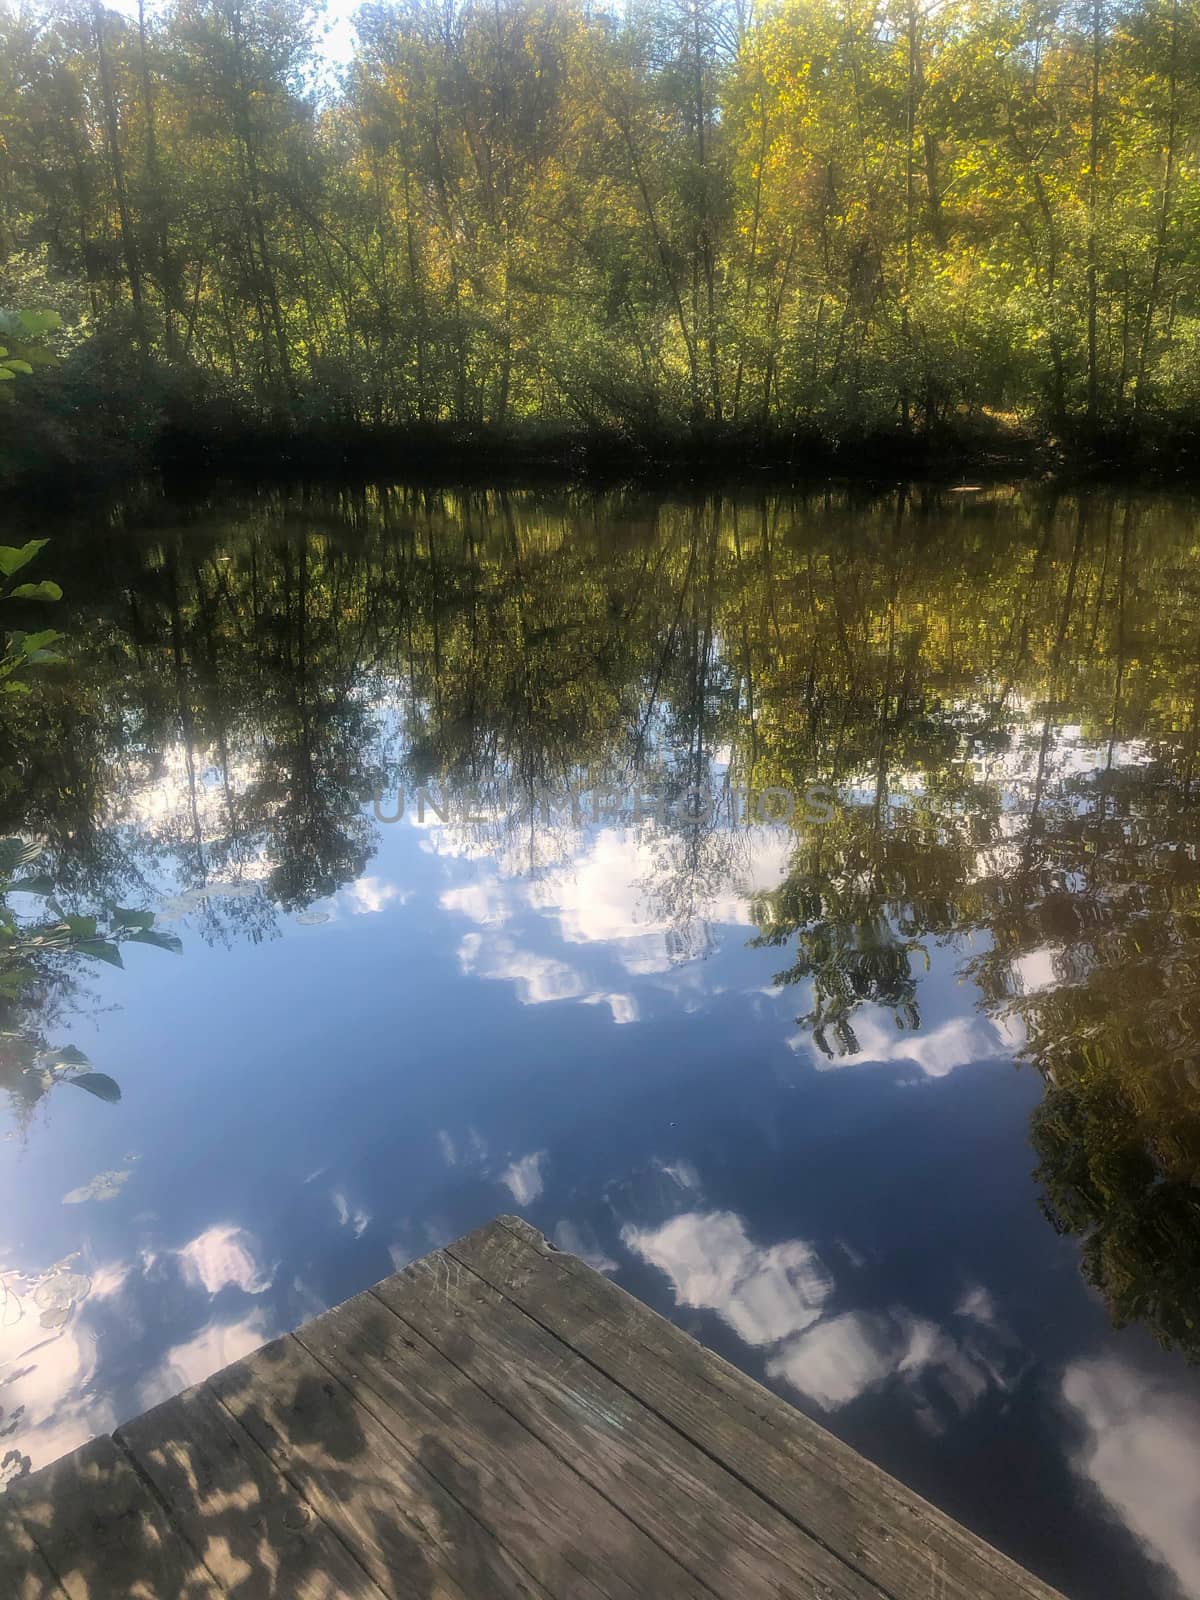 Beautiful image of a forest reflection in a lake with trees big blue sky and clouds and wooden dock in foreground.